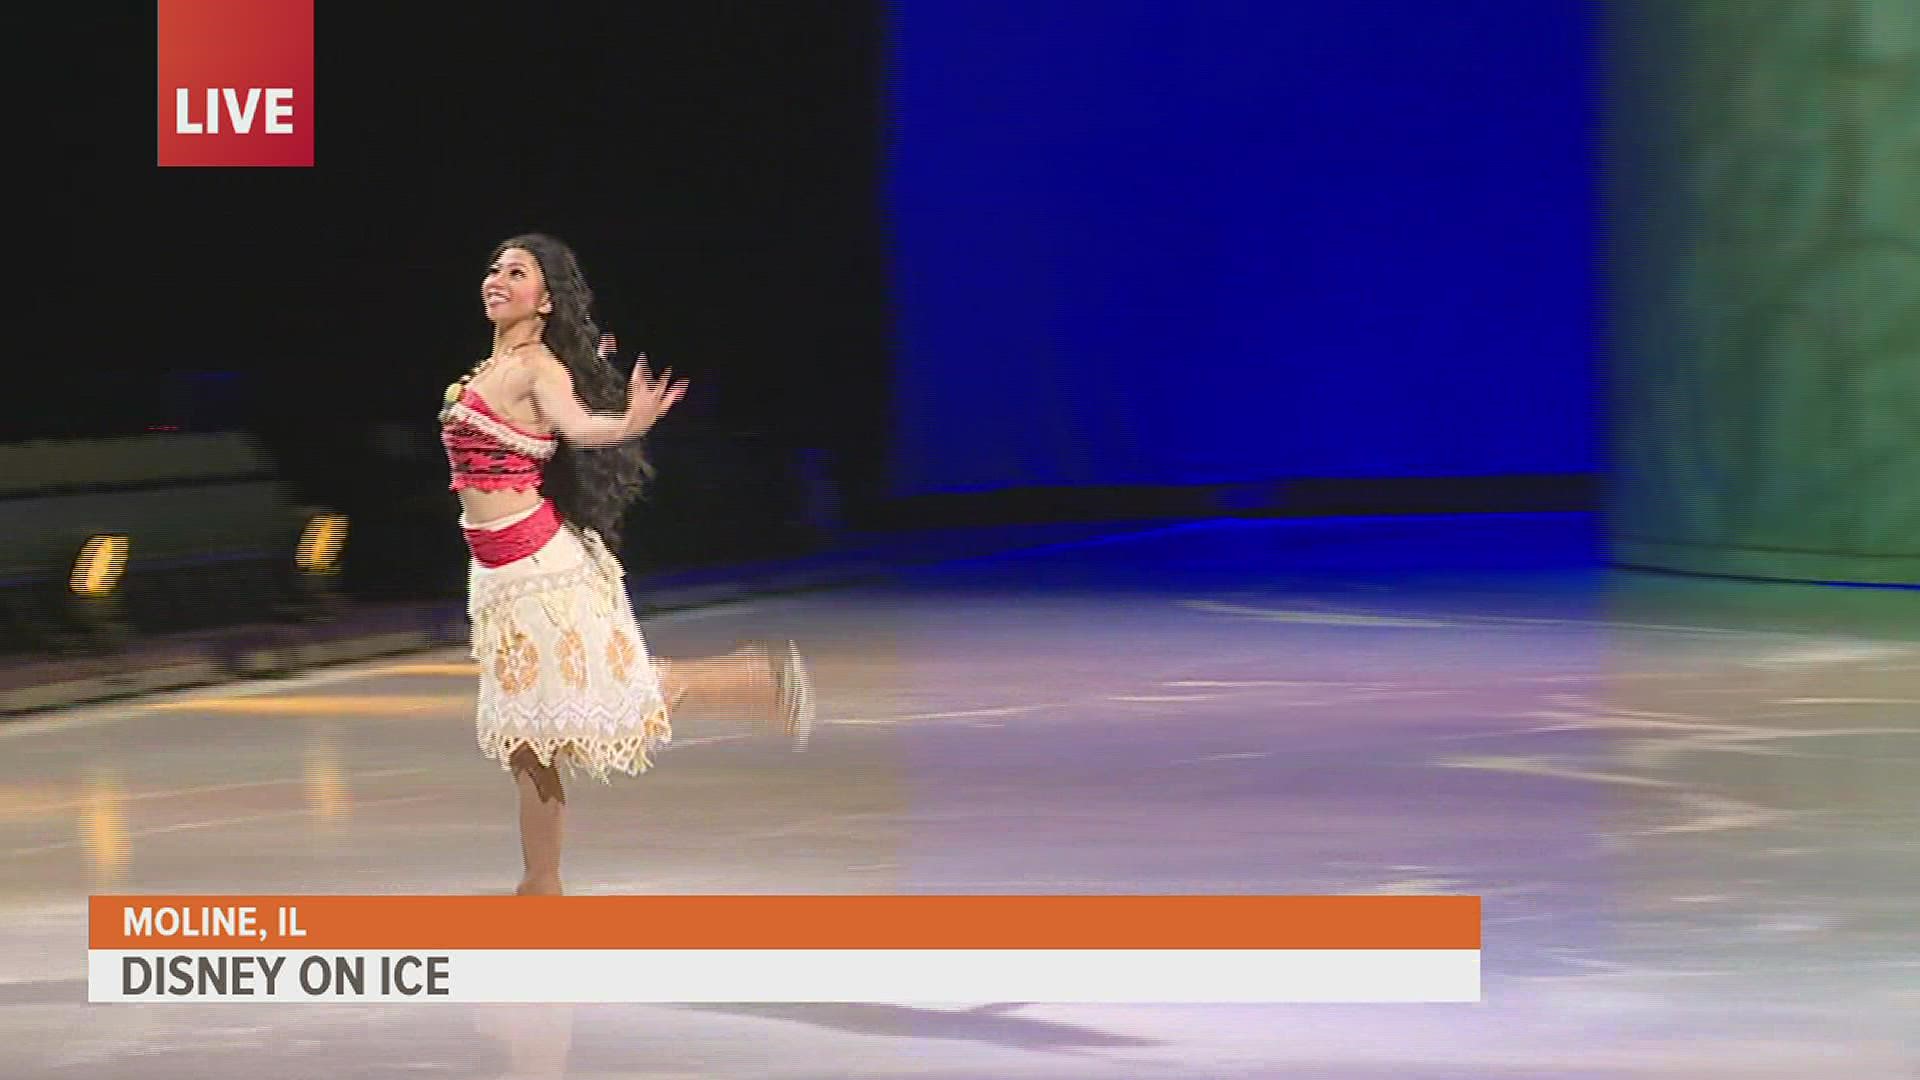 News 8 is live at the Vibrant Arena with a sneak peak at Disney on Ice's "Into the Magic."